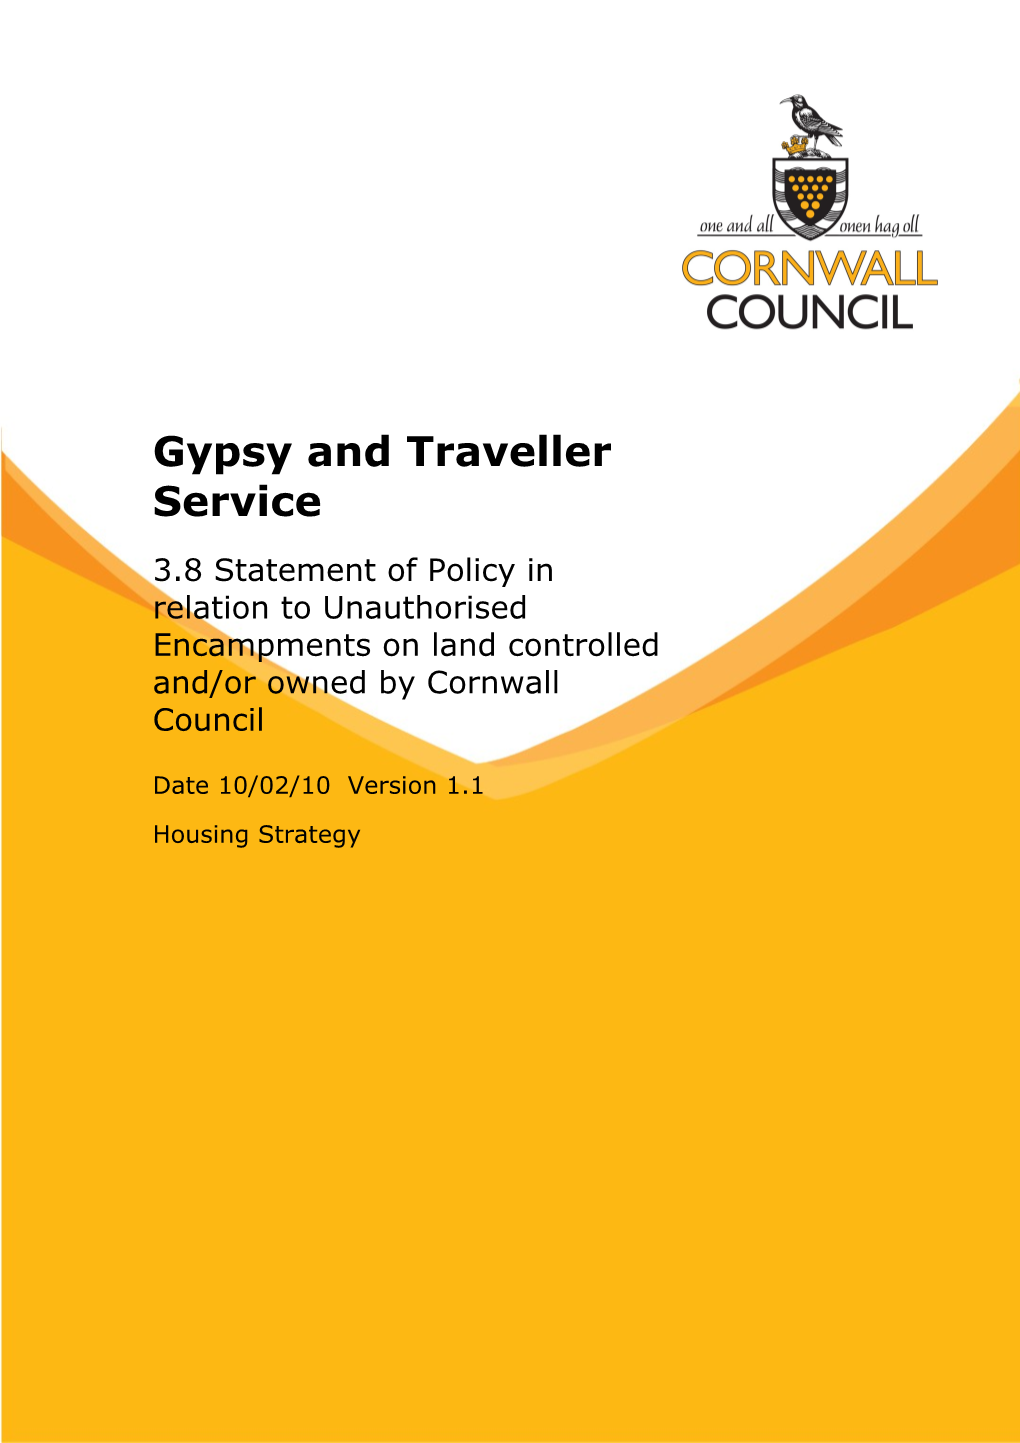 3.8 Statement of Policy in Relation to Unauthorised Encampments on Land Controlled And/Or